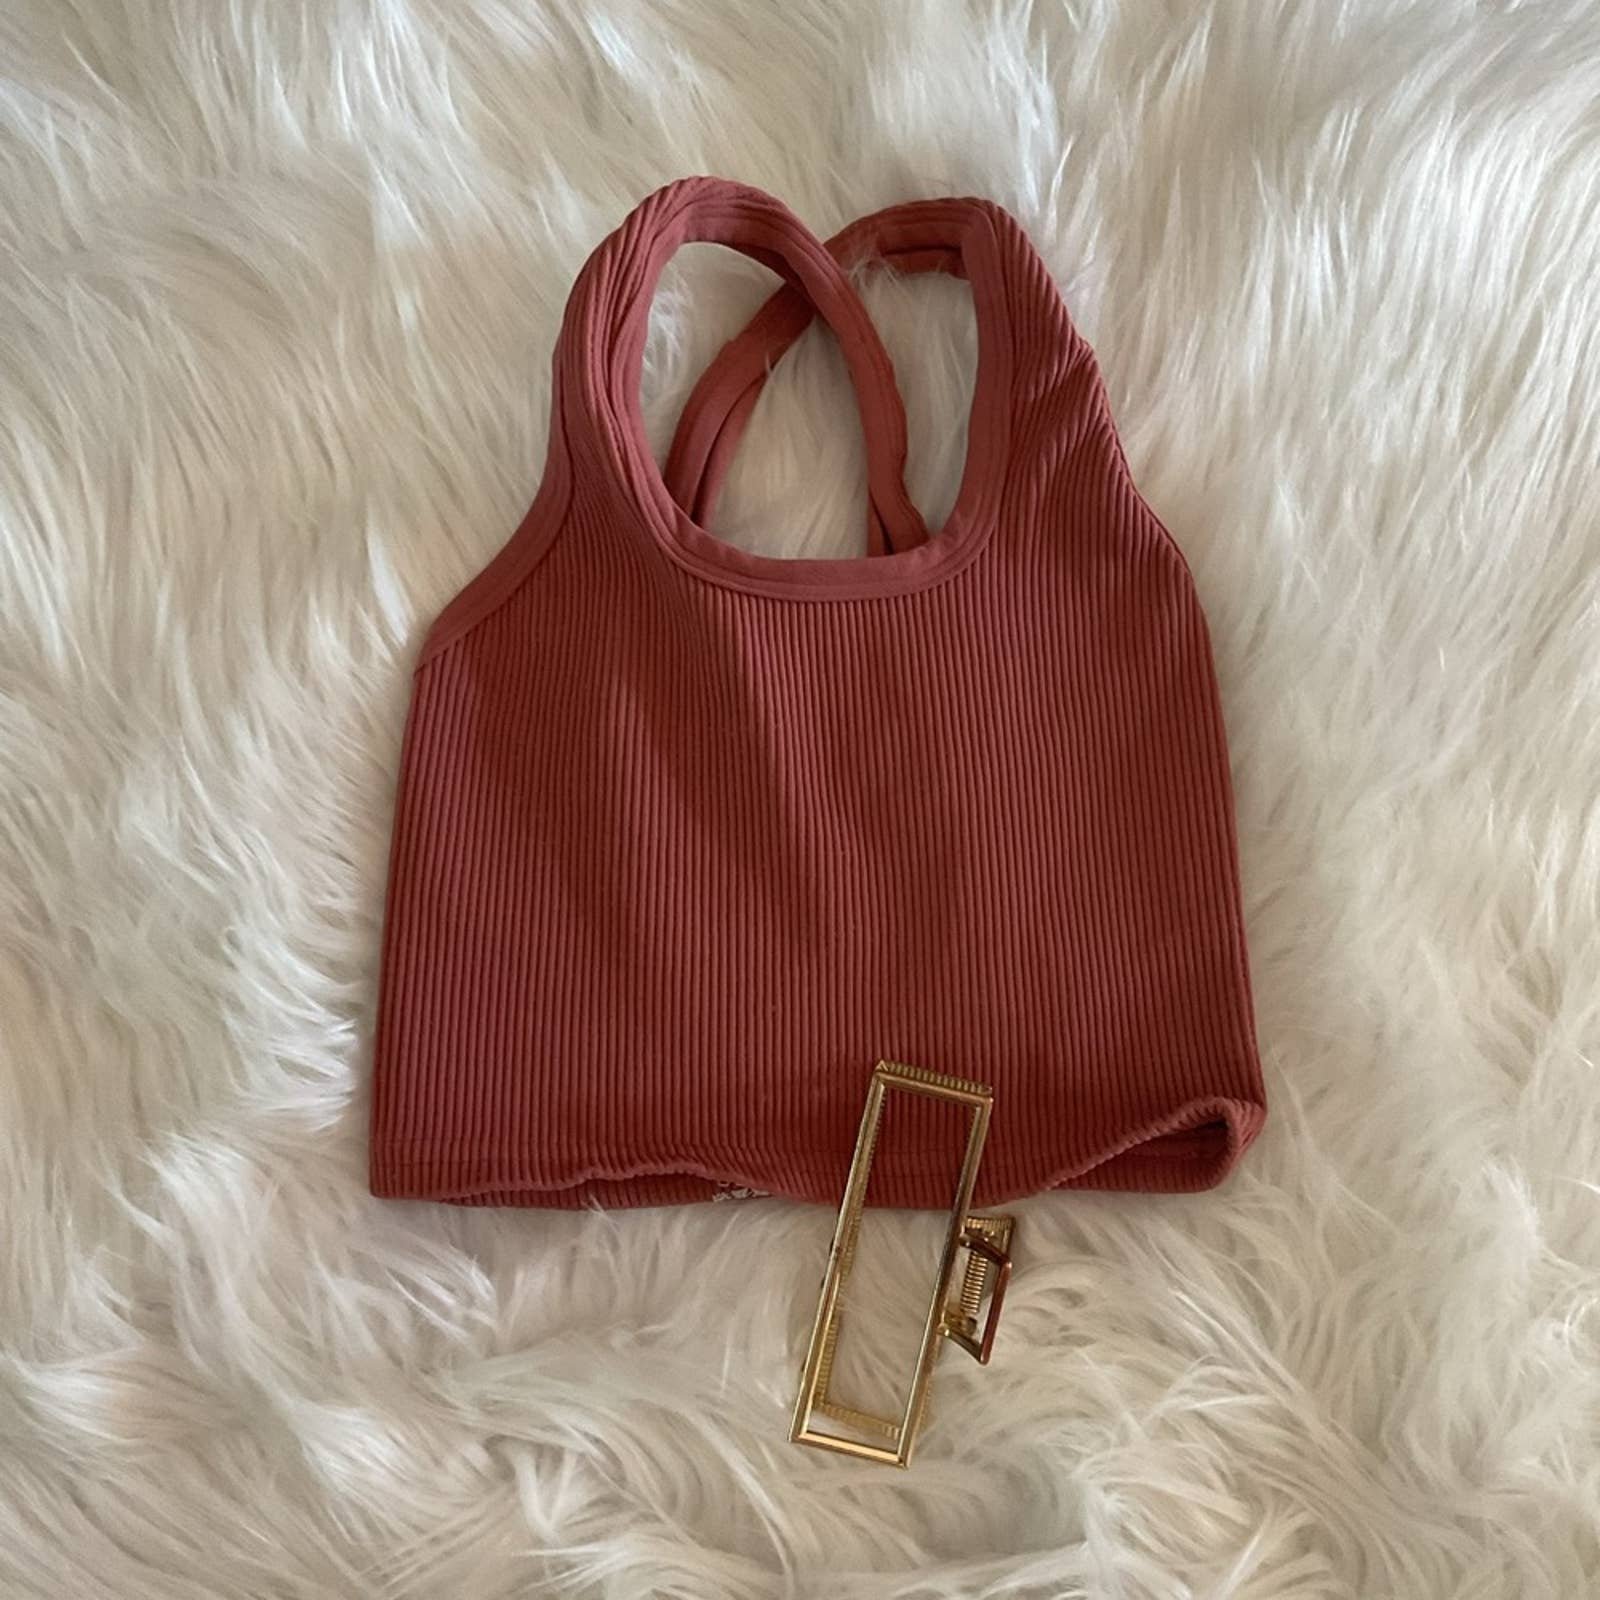 Popular Free People Happiness Runs Convertible Tank in Rose Pink oIB04AoSo outlet online shop